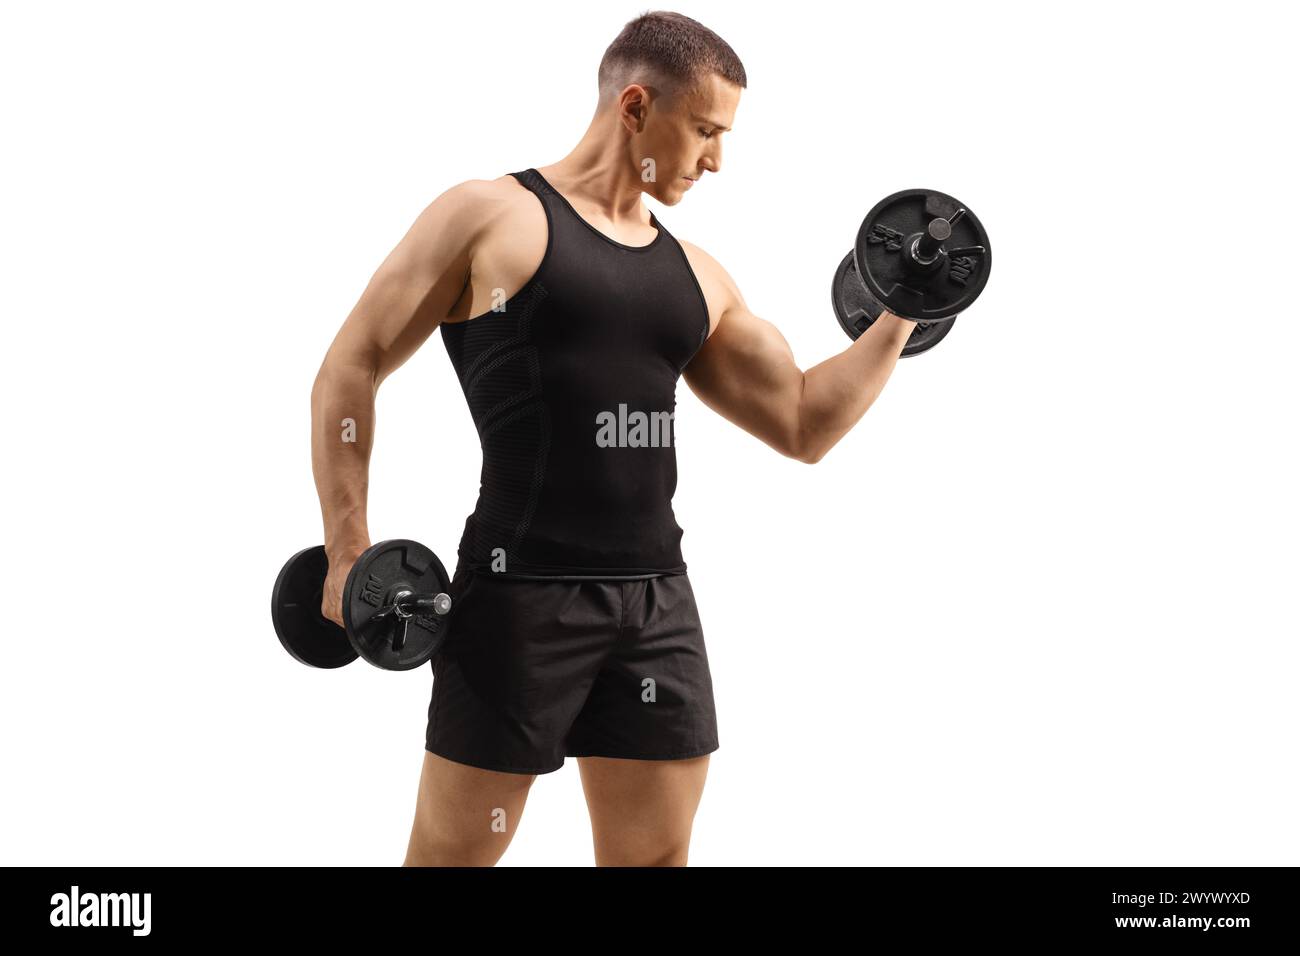 Man exercising weight training with a dumbbell isolated on white background, sport and fitness concept Stock Photo